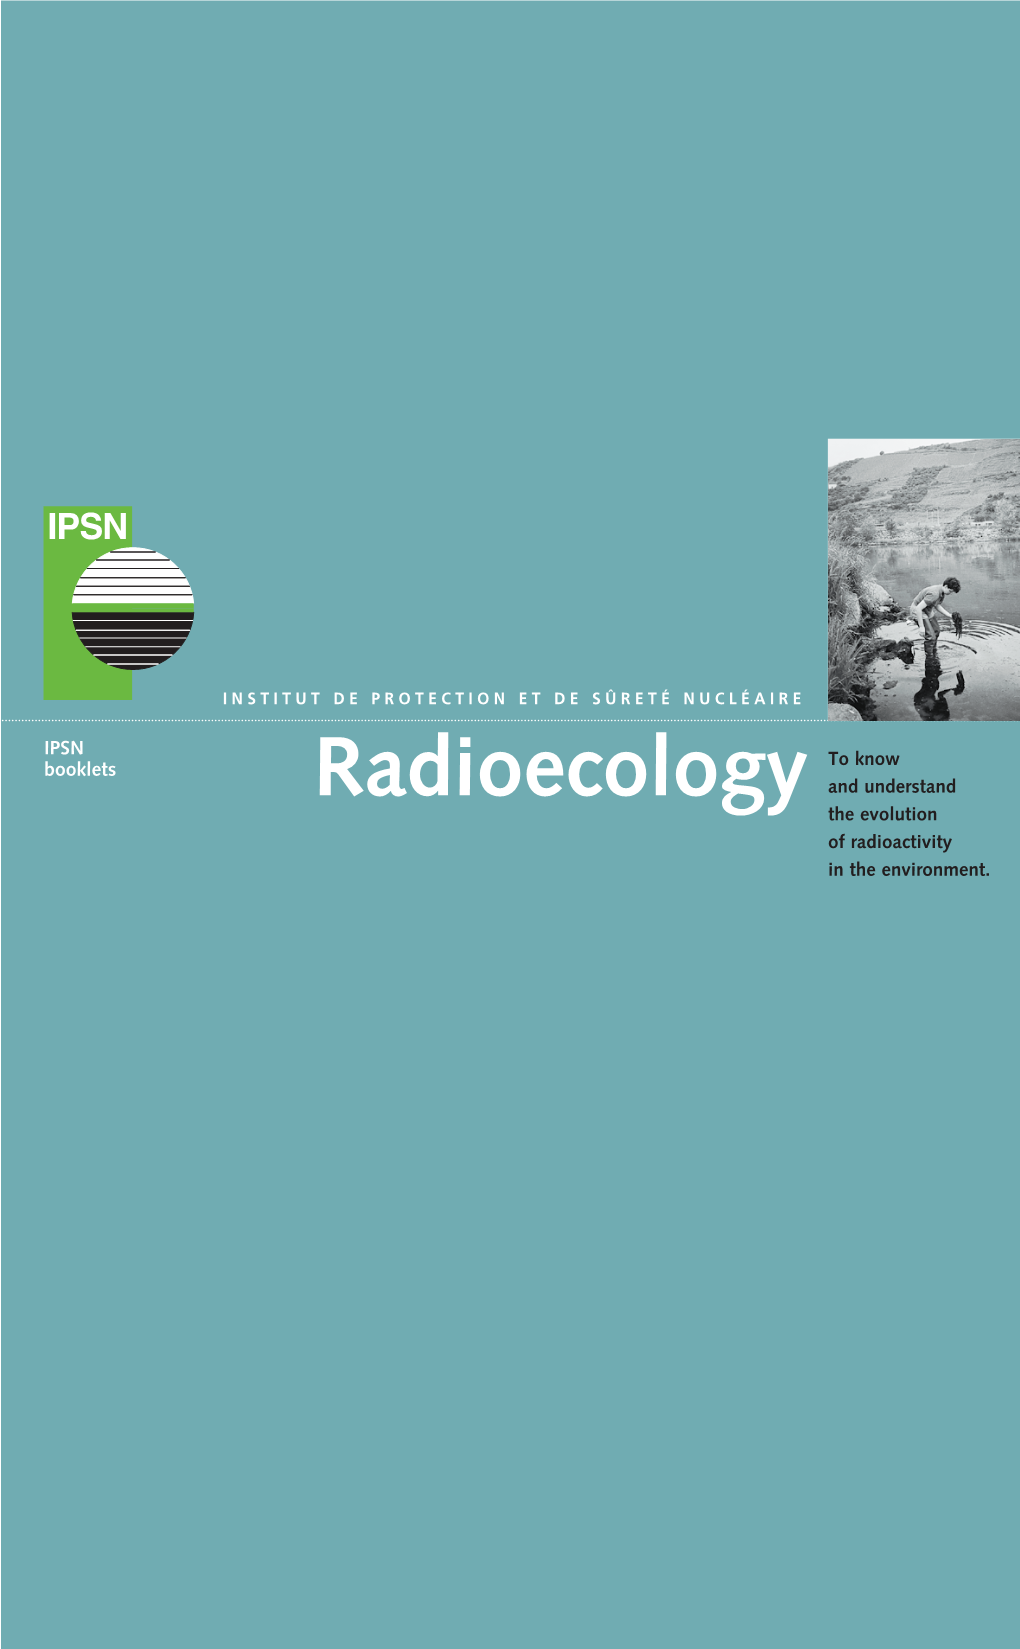 Radioecology and Understand the Evolution of Radioactivity in the Environment